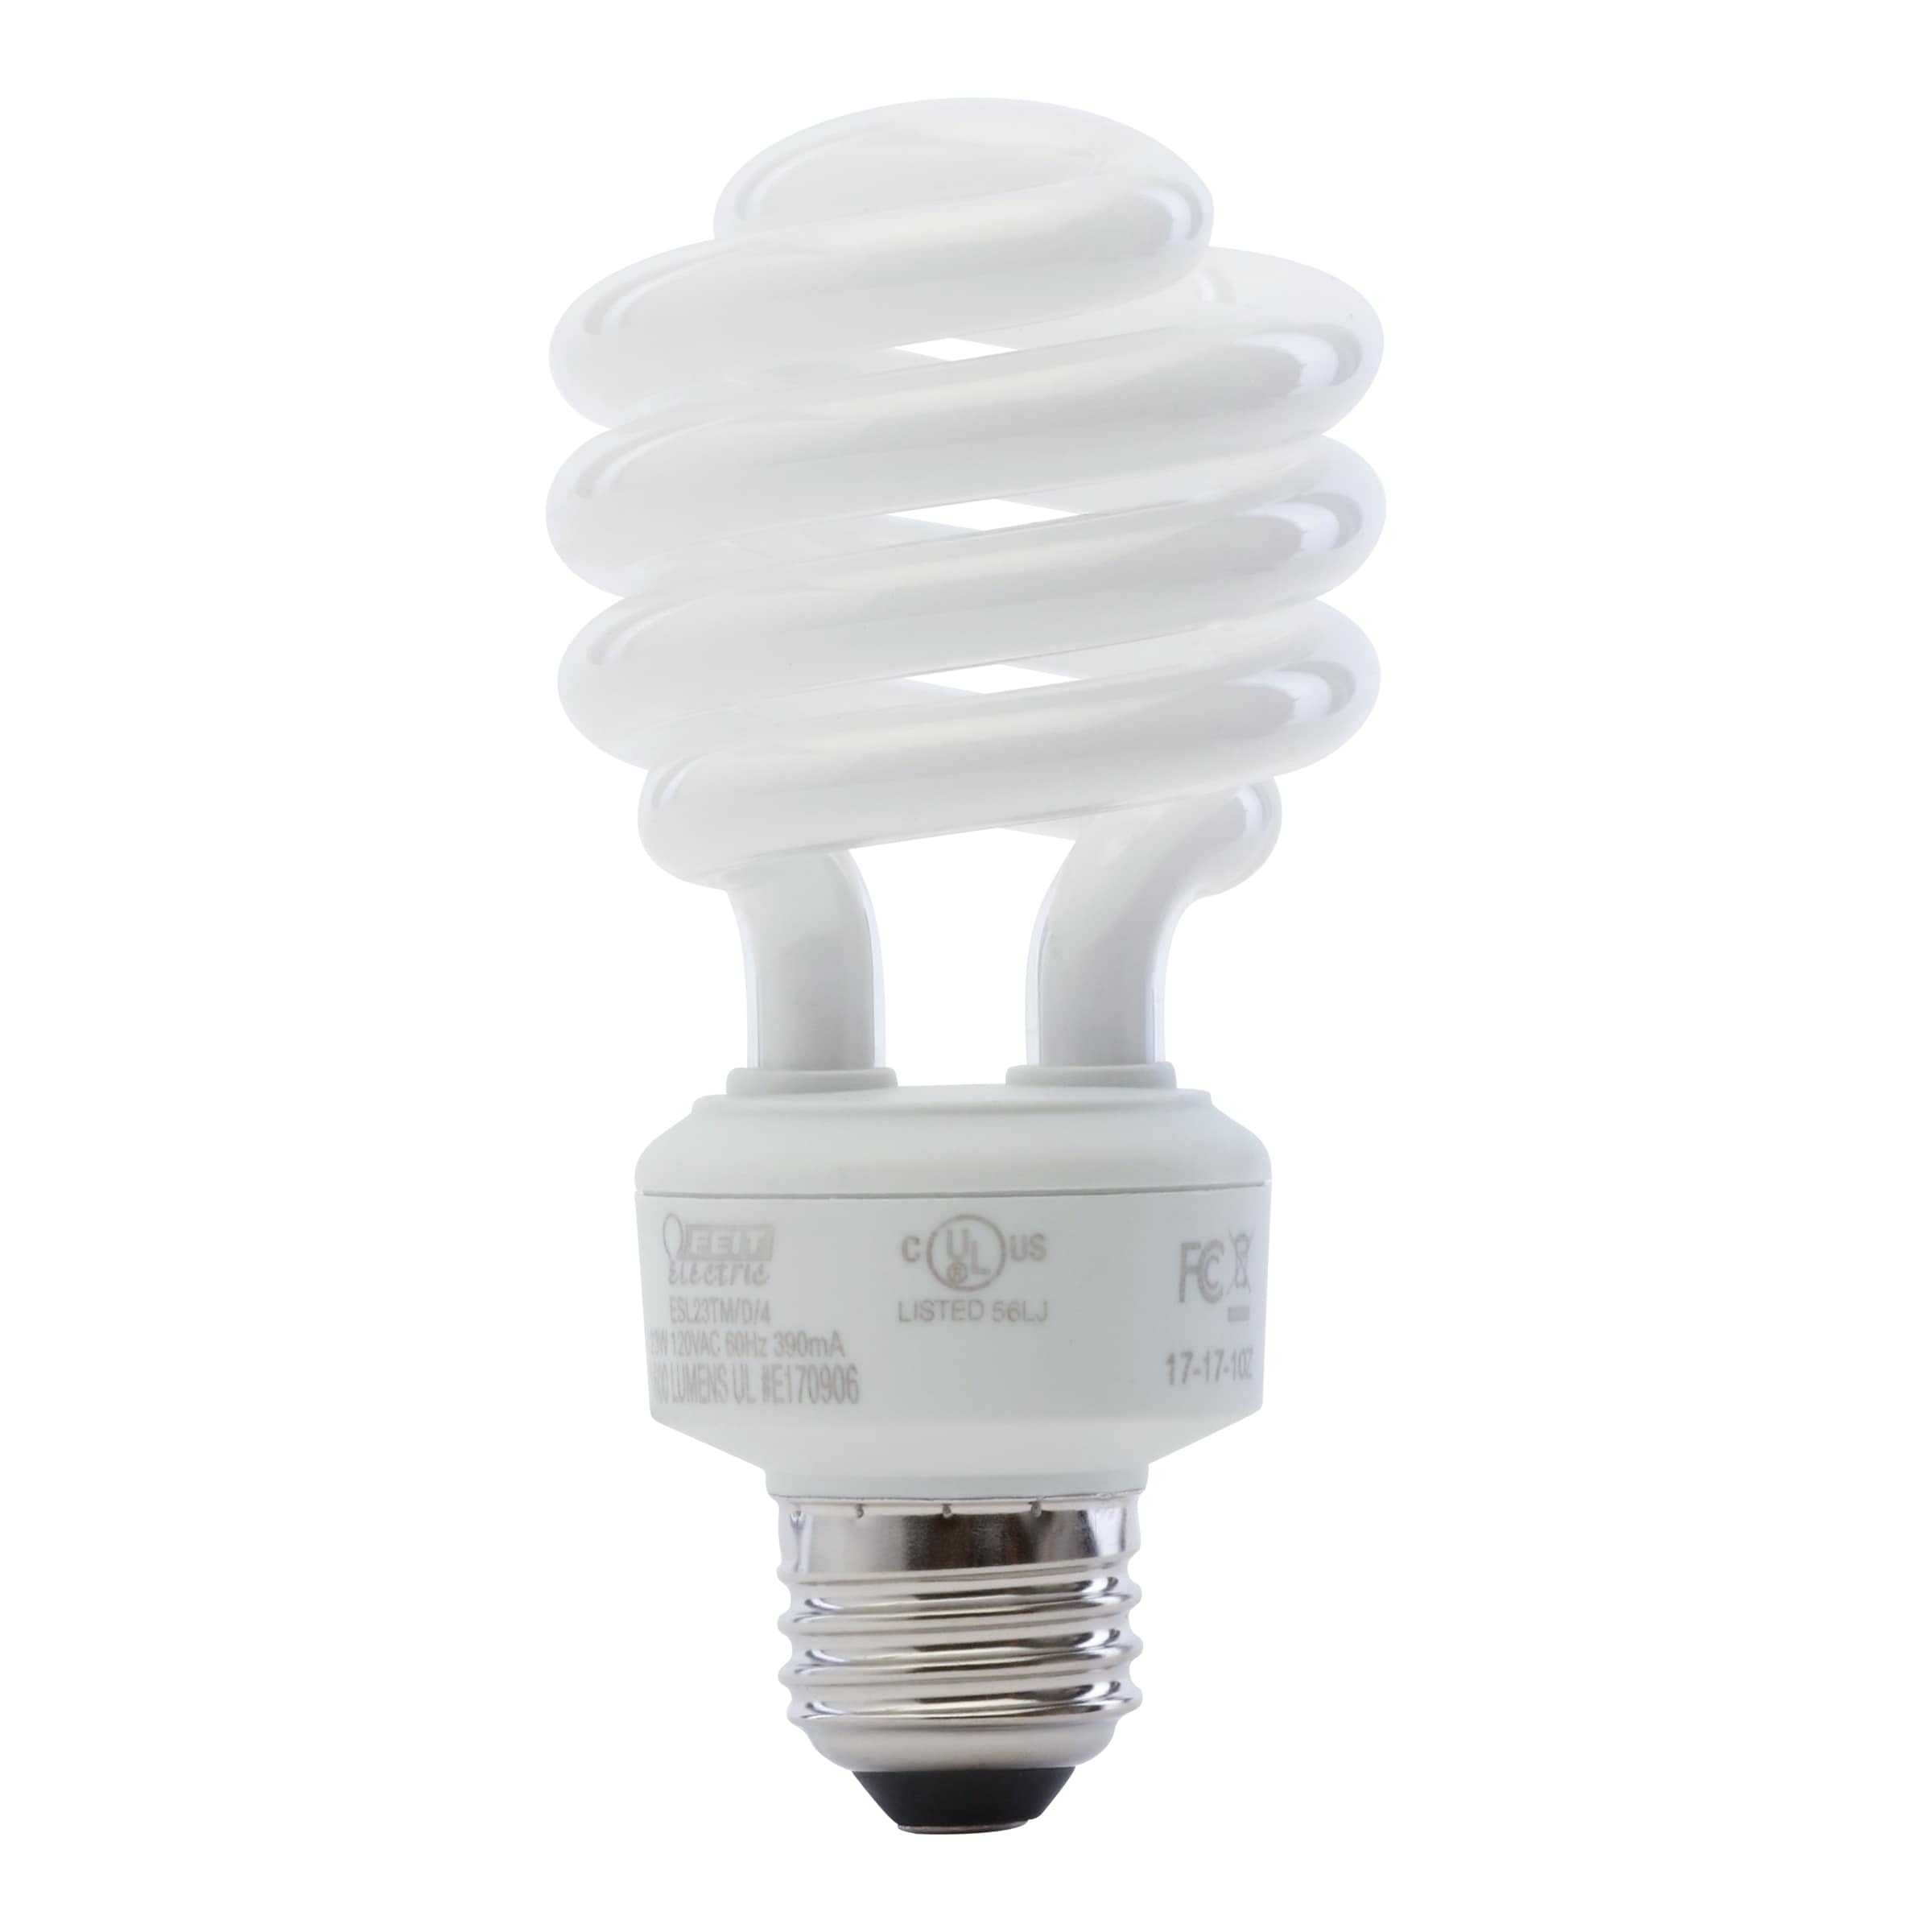 Westpointe - 15W Compact Fluorescent Flood Light Bulb Equivalent To 65W  Incandescent